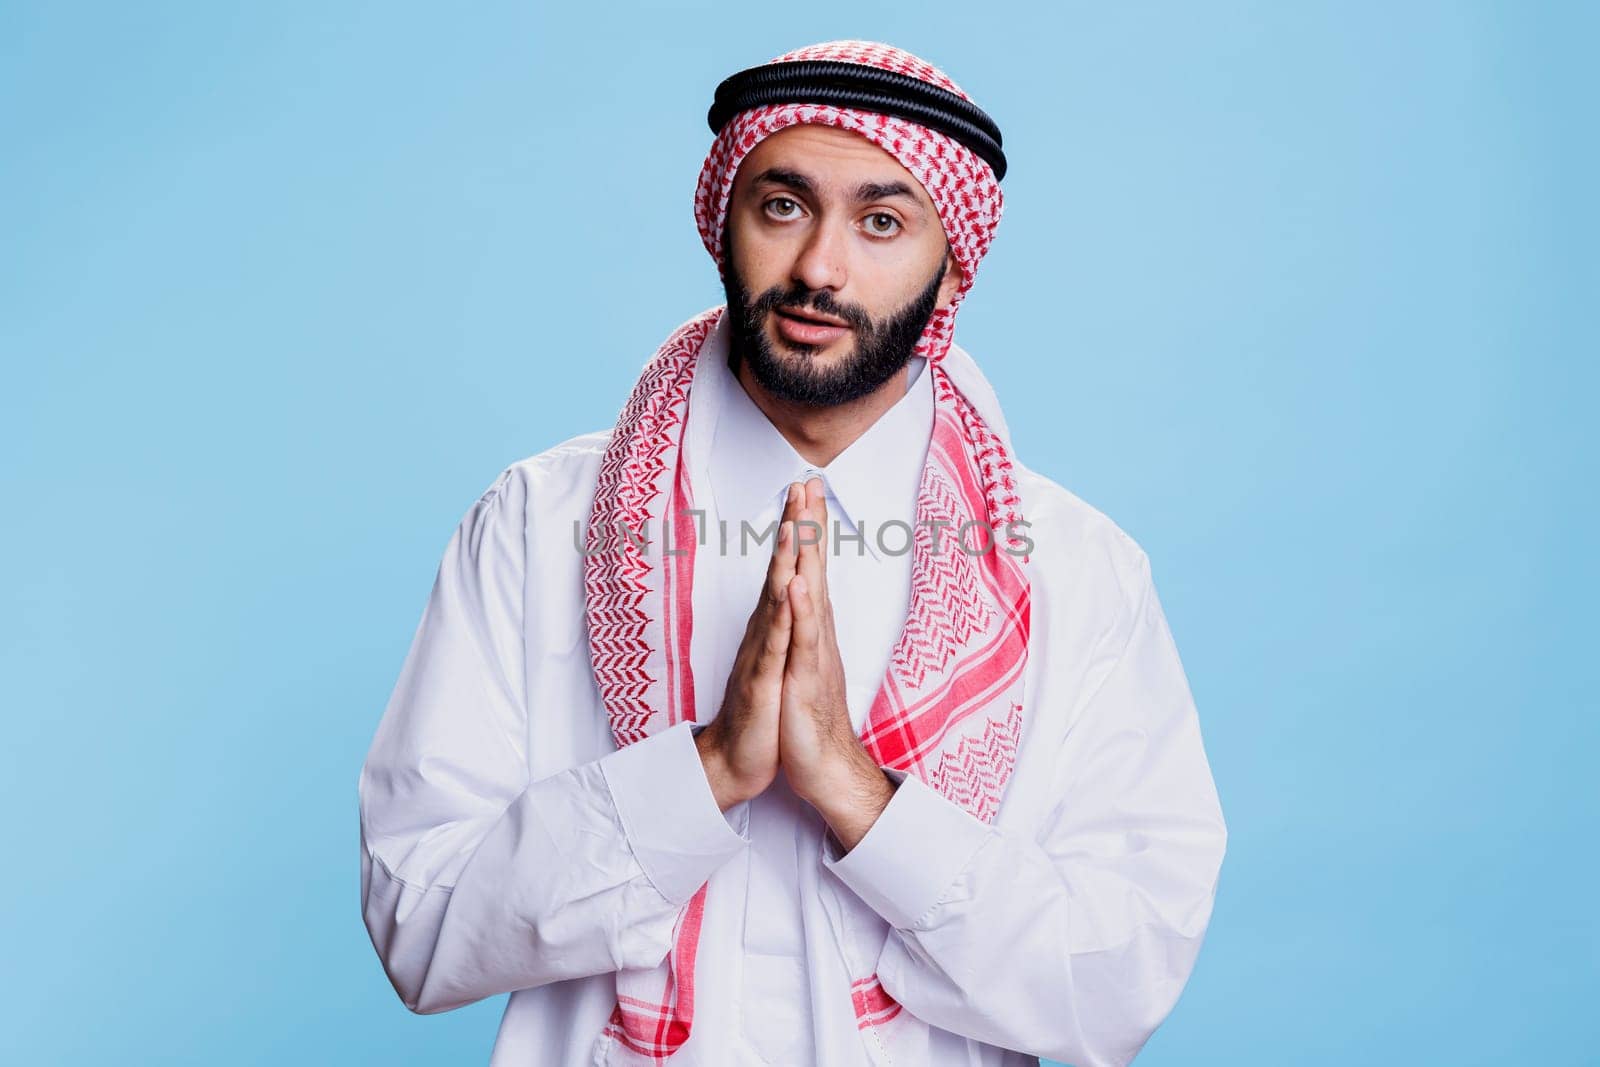 Man wearing traditional muslim thobe and ghutra clothes praying studio portrait. Arab person standing with folded hands showing symbol of faith and spirituality while looking at camera